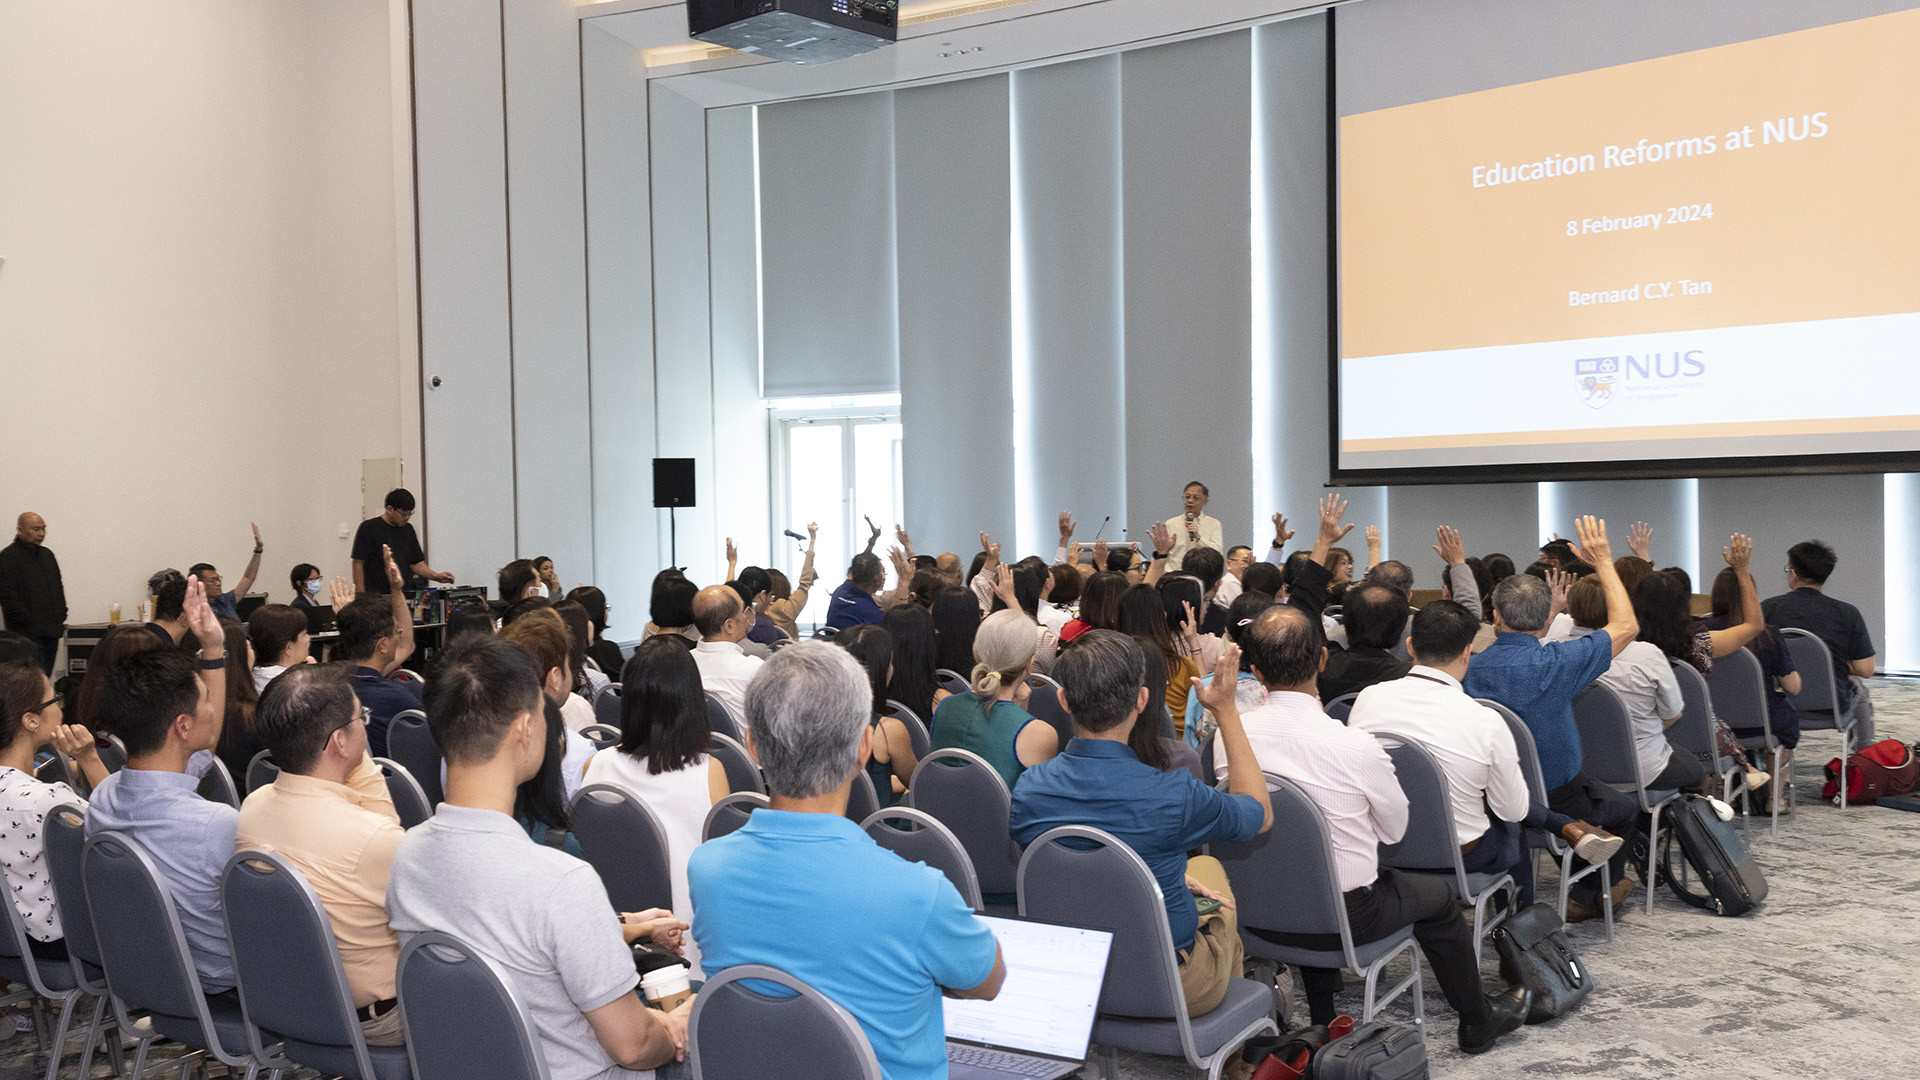 Some 90 alumni, staff, and members of the public attended the talk to learn about the educational reforms undertaken by NUS to prepare students to meet the demands of the future workplace.